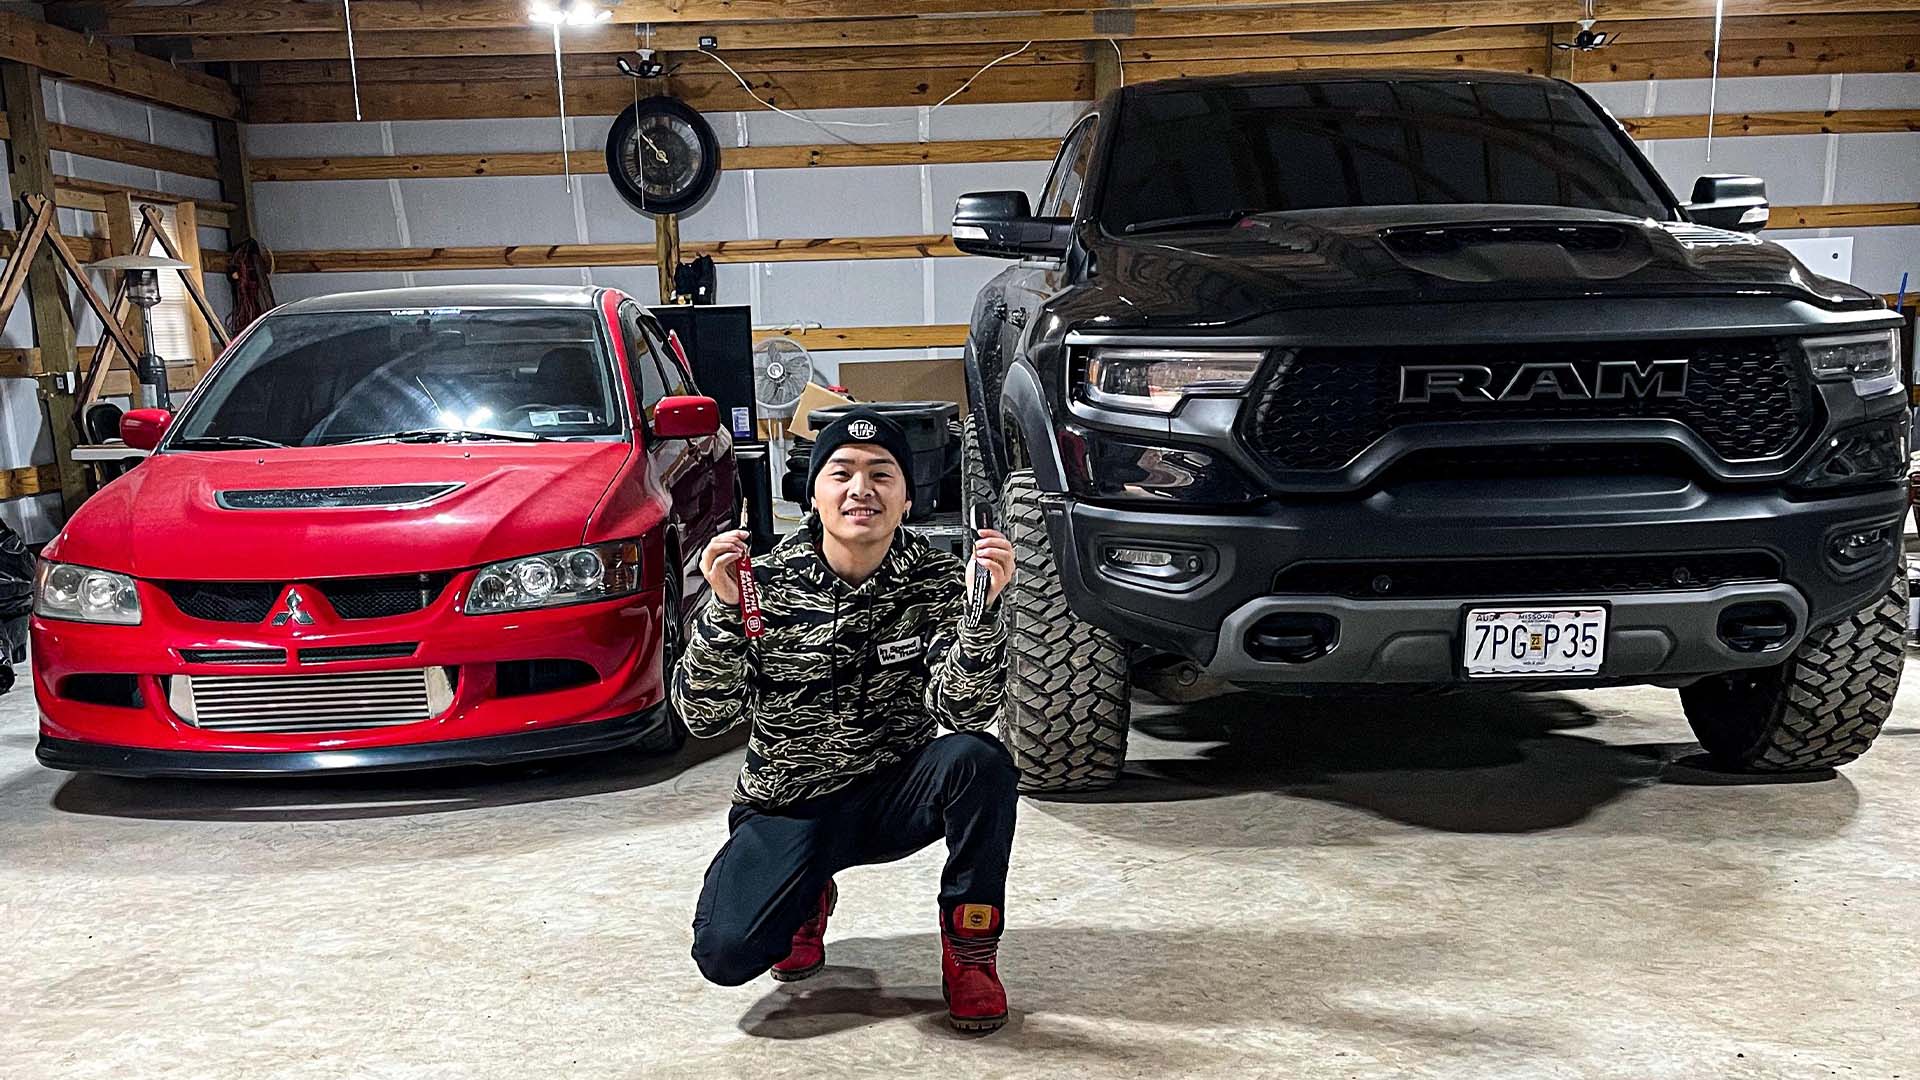 Guy Wins Free Ram TRX and Mitsubishi Evo 8 in Separate Contests in One Year